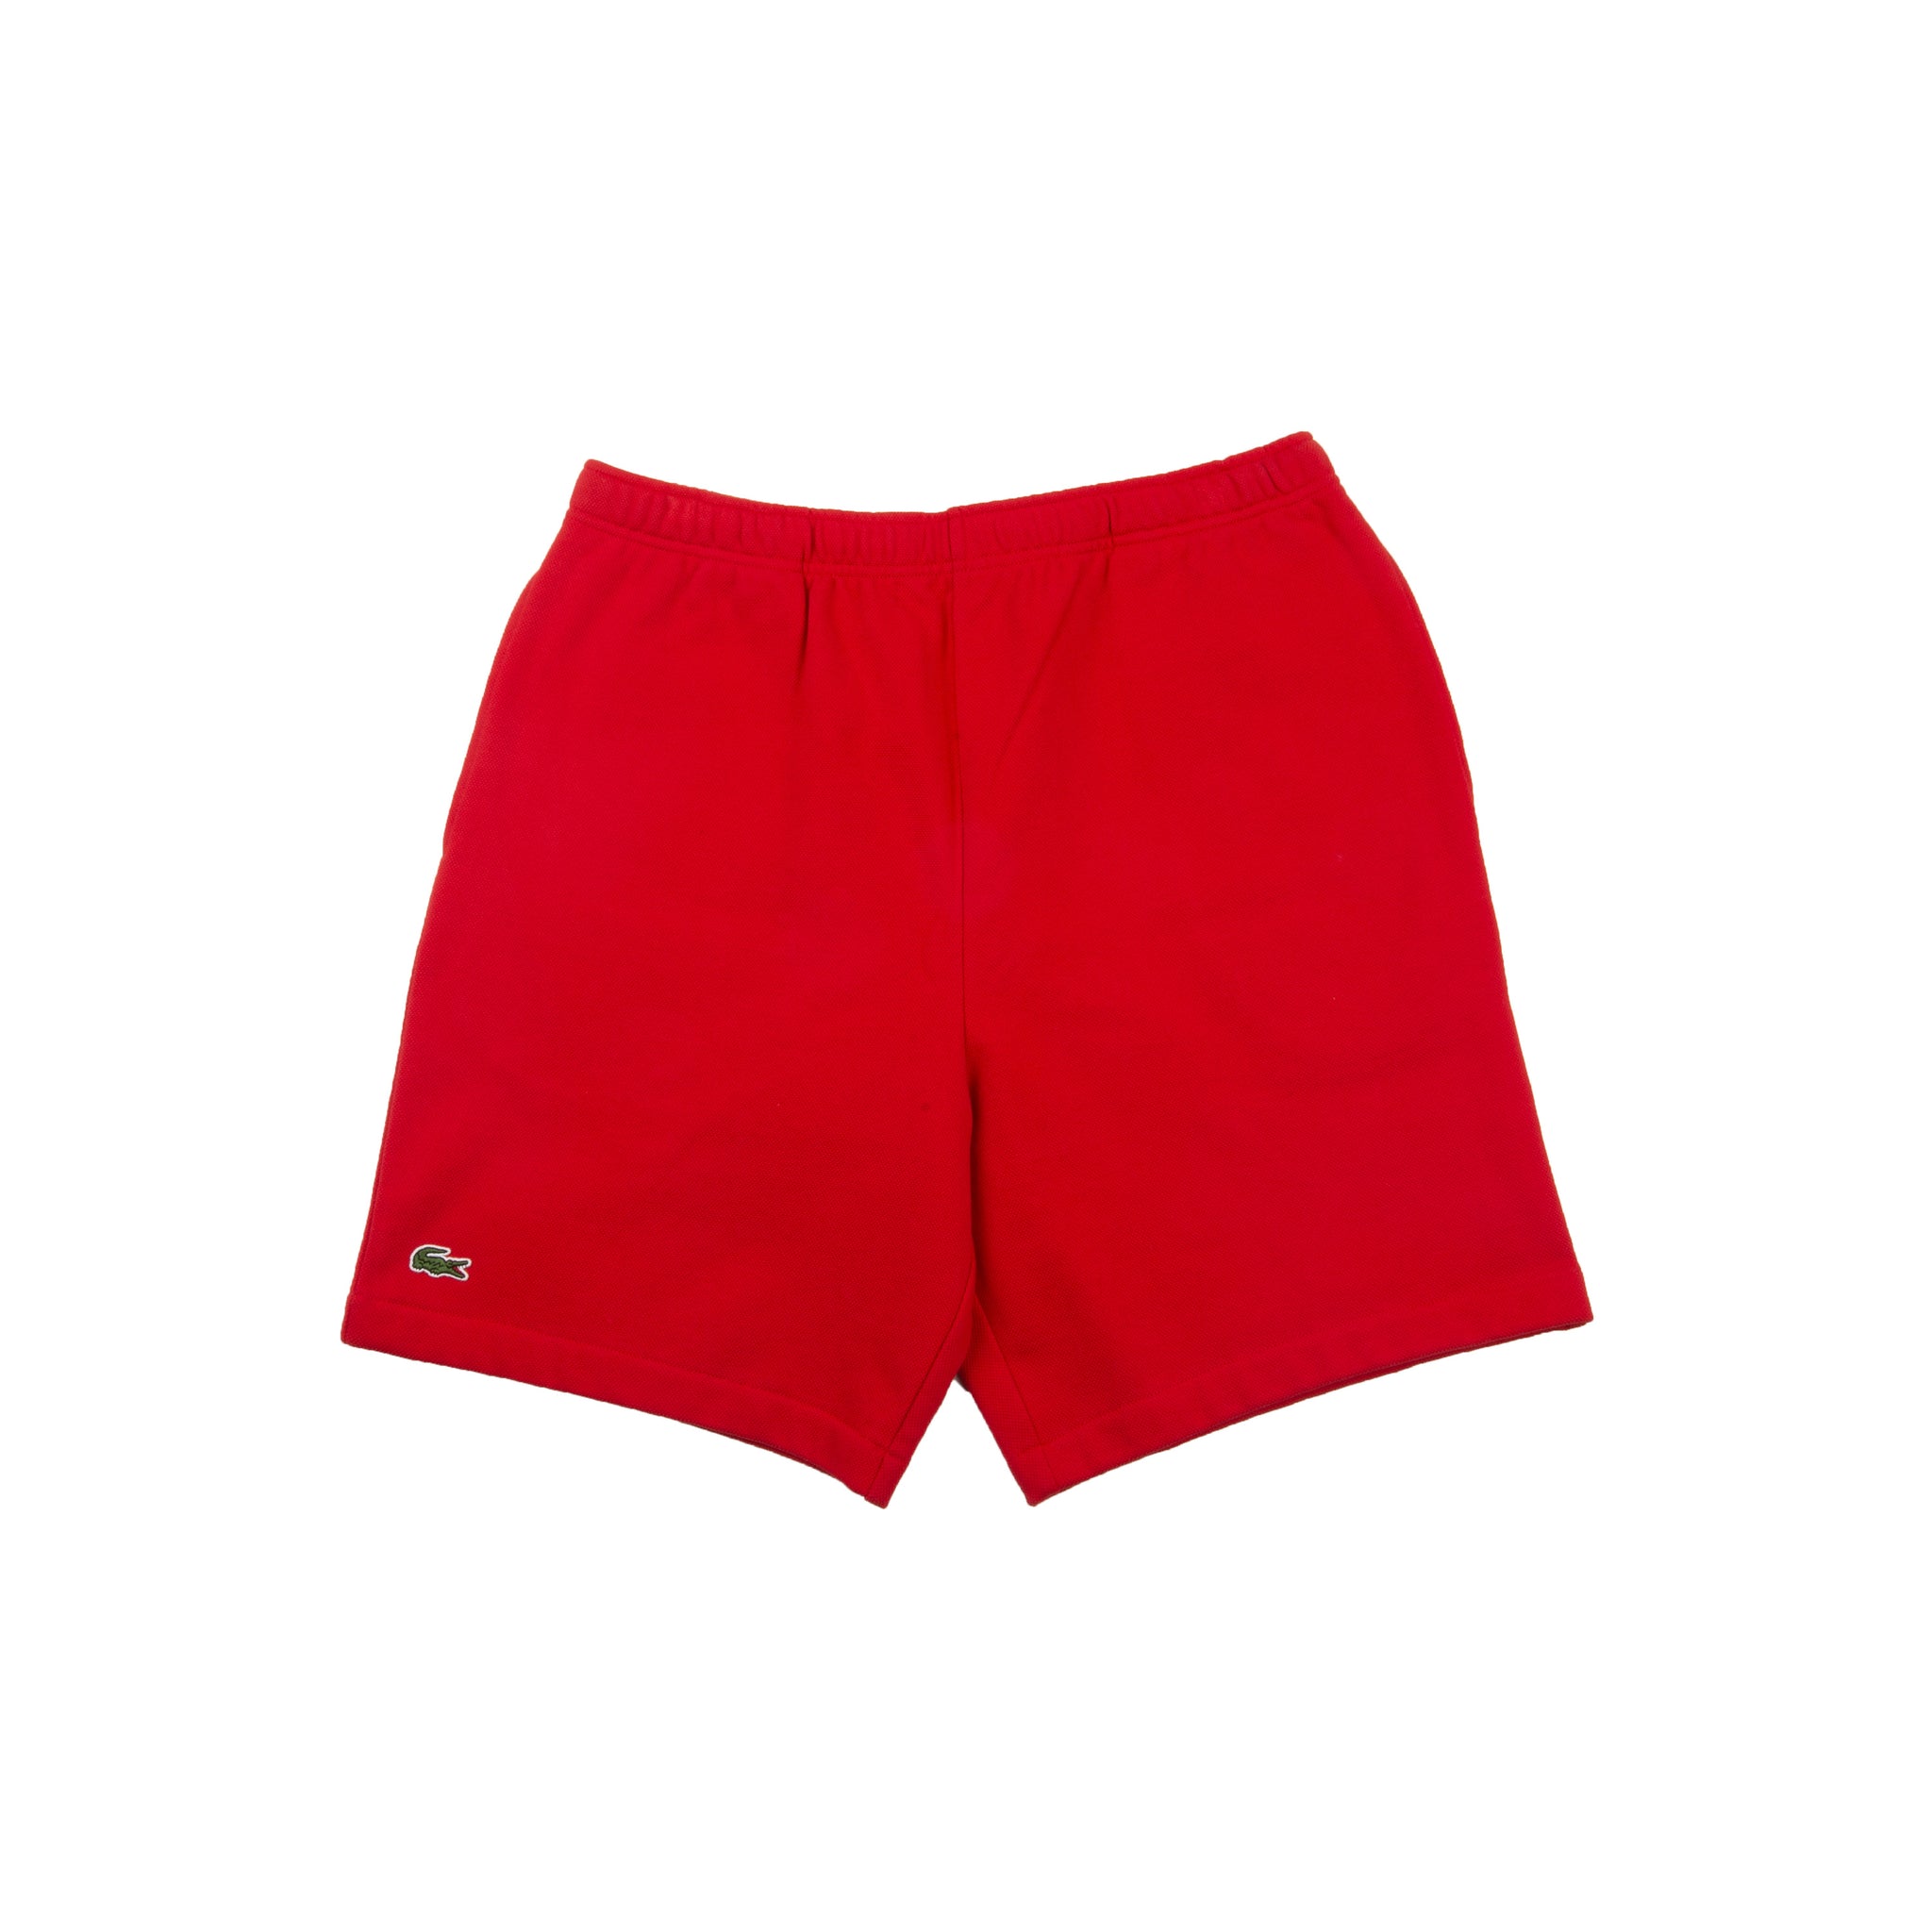 Supreme Red Lacoste Pique Shorts